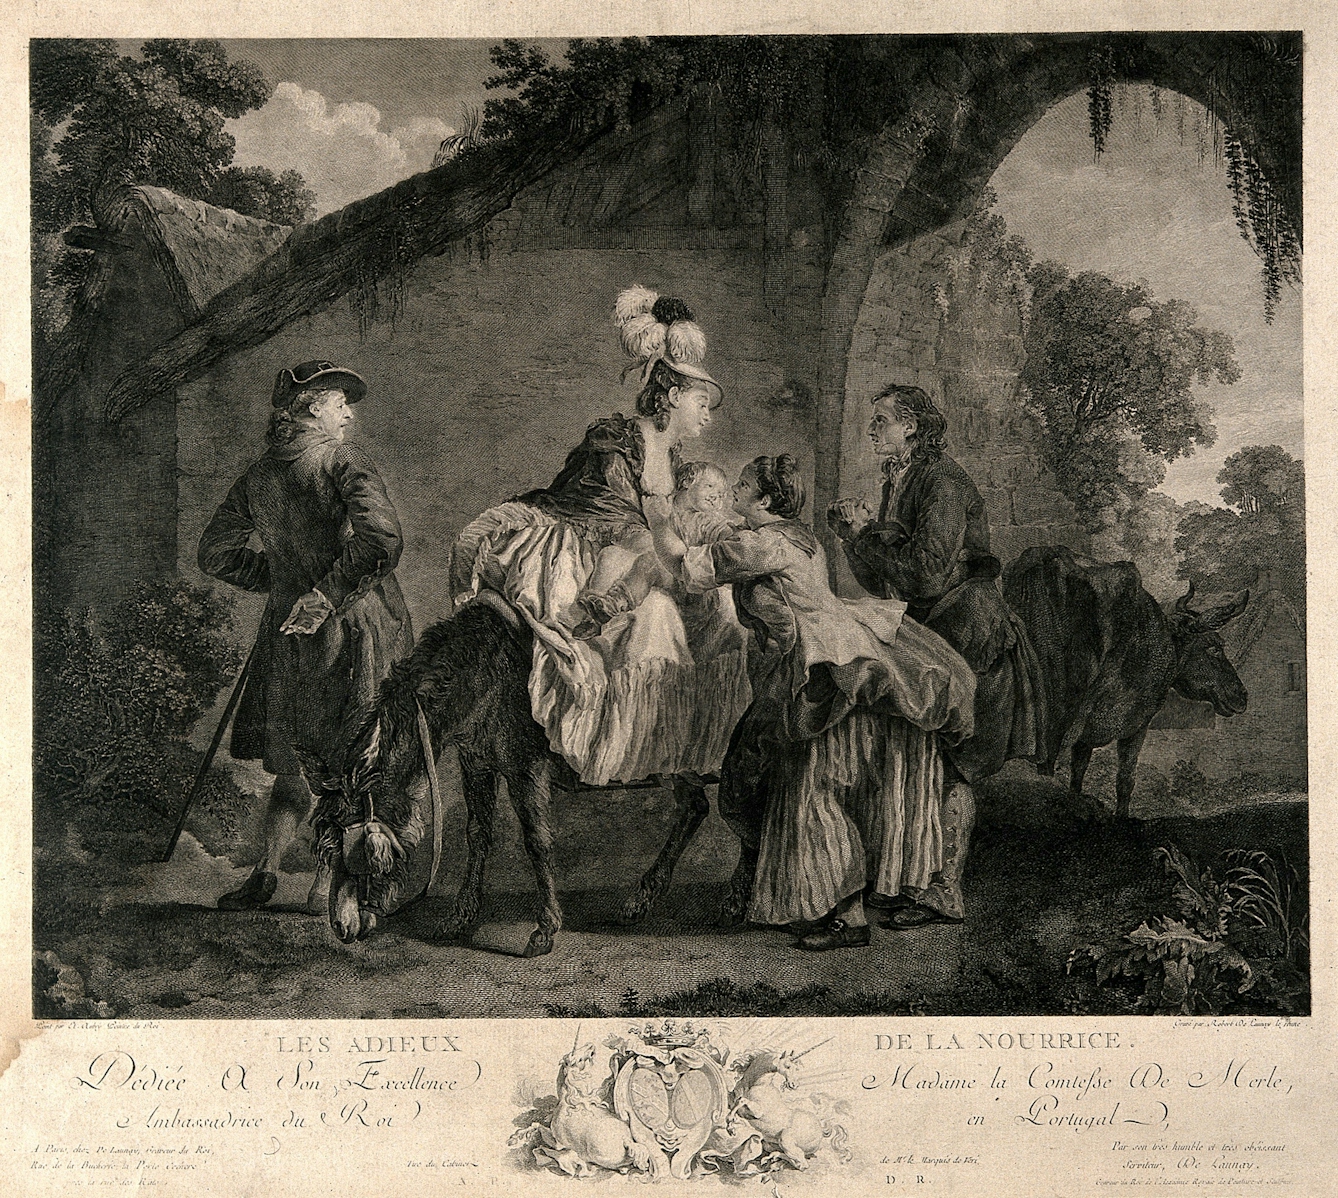 Black and white etching showing a baby being given by a woman dressed in poorer clothes to one on a horse wearing expensive clothes and a feathered hat. 